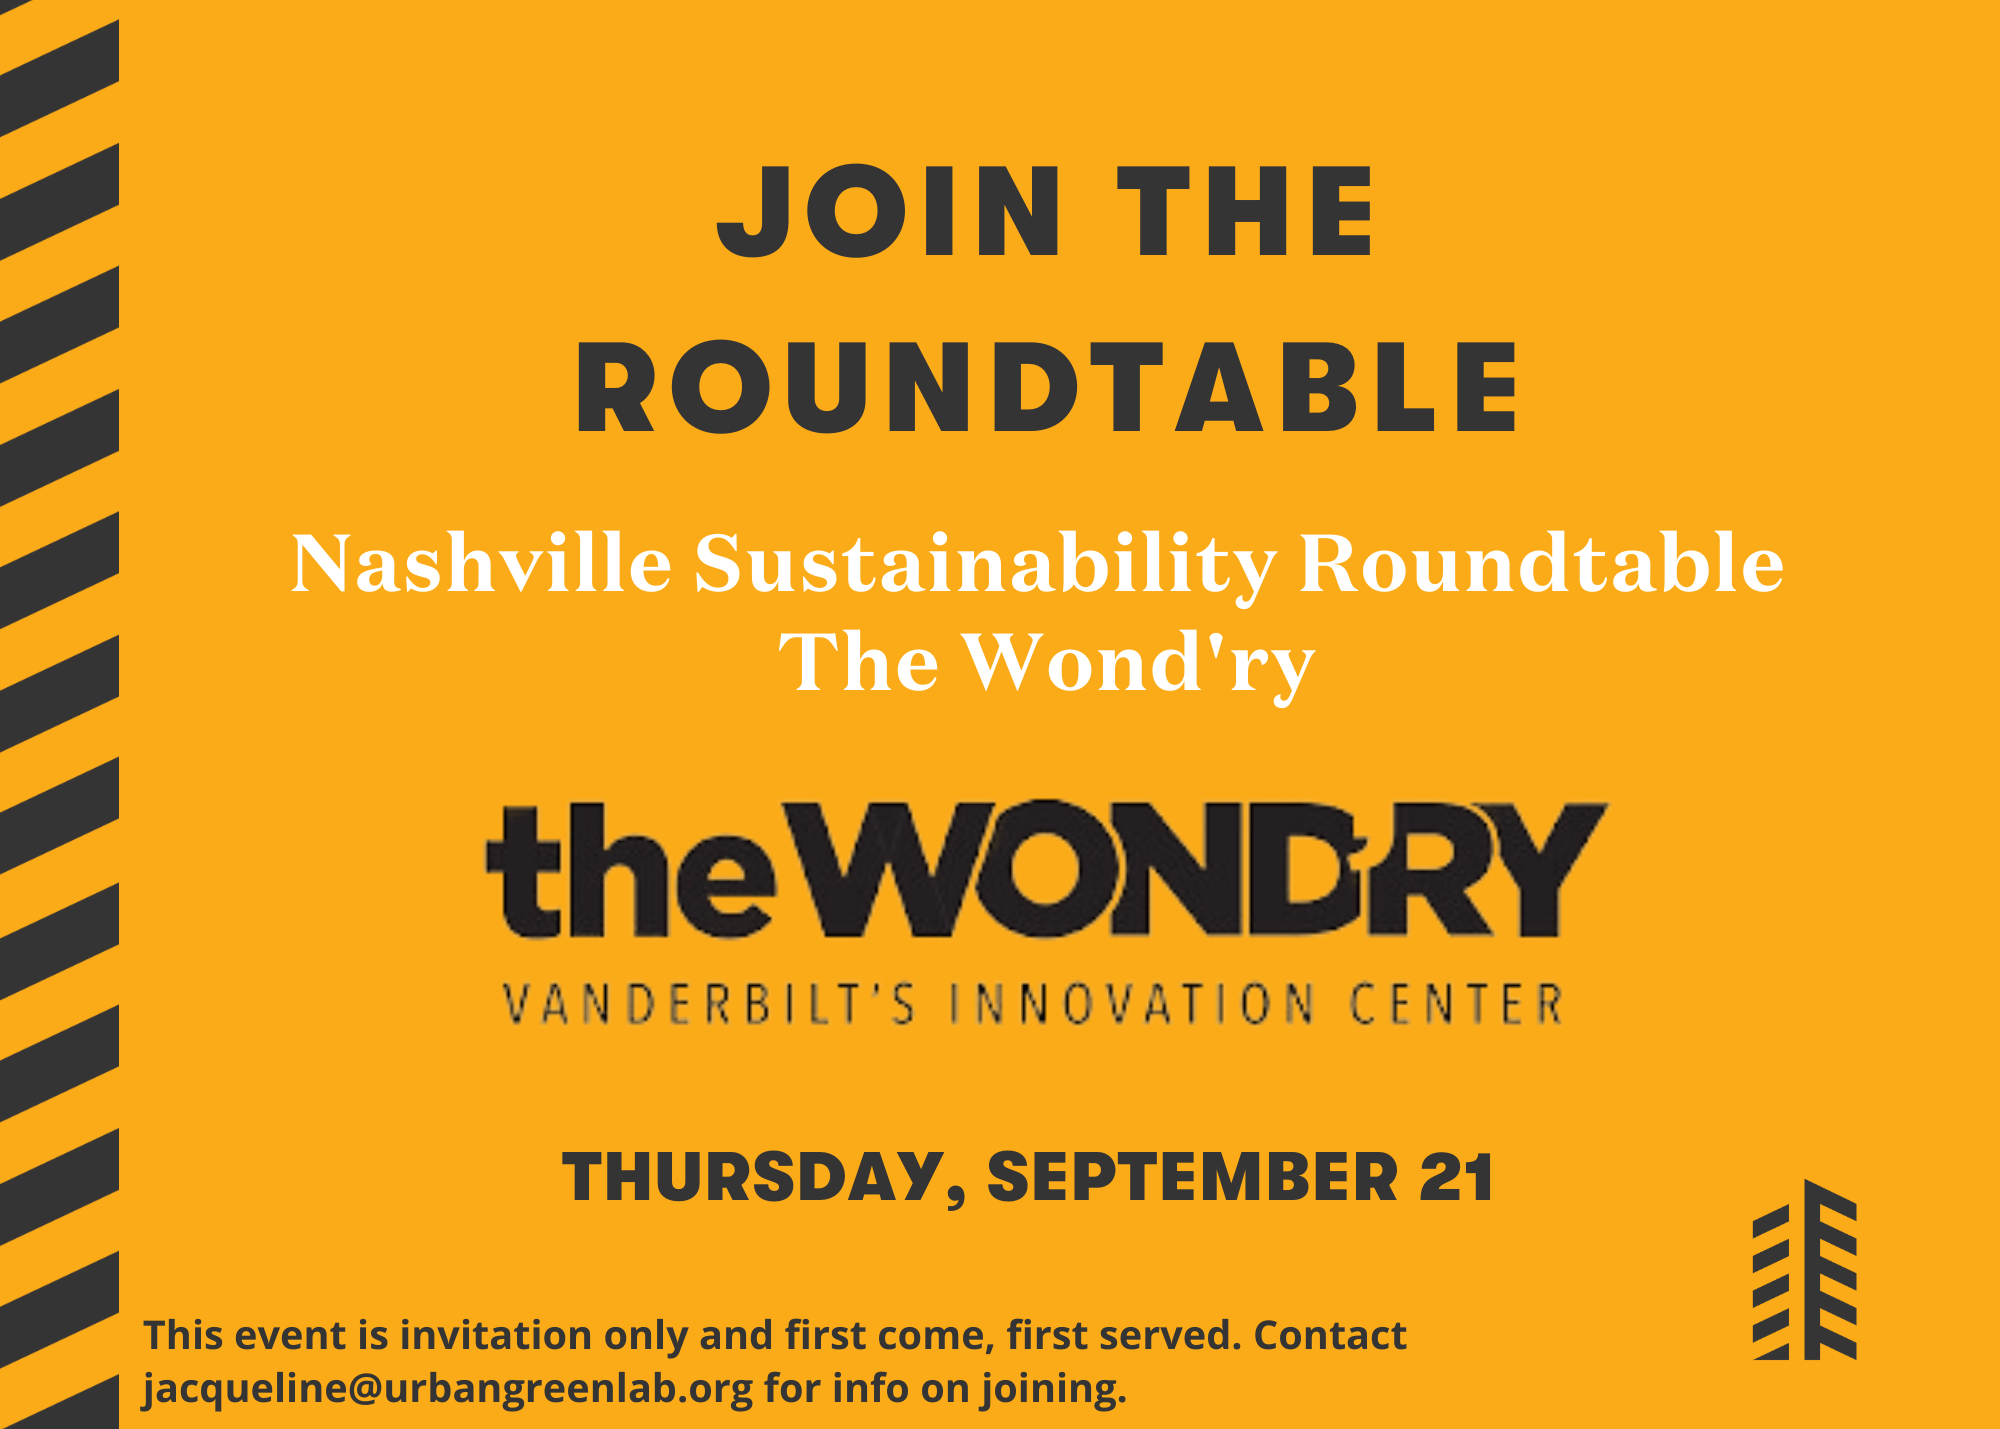 Graphic encouraging people to join the Nashville Sustainability Roundtable and attend our event at The Wond'ry